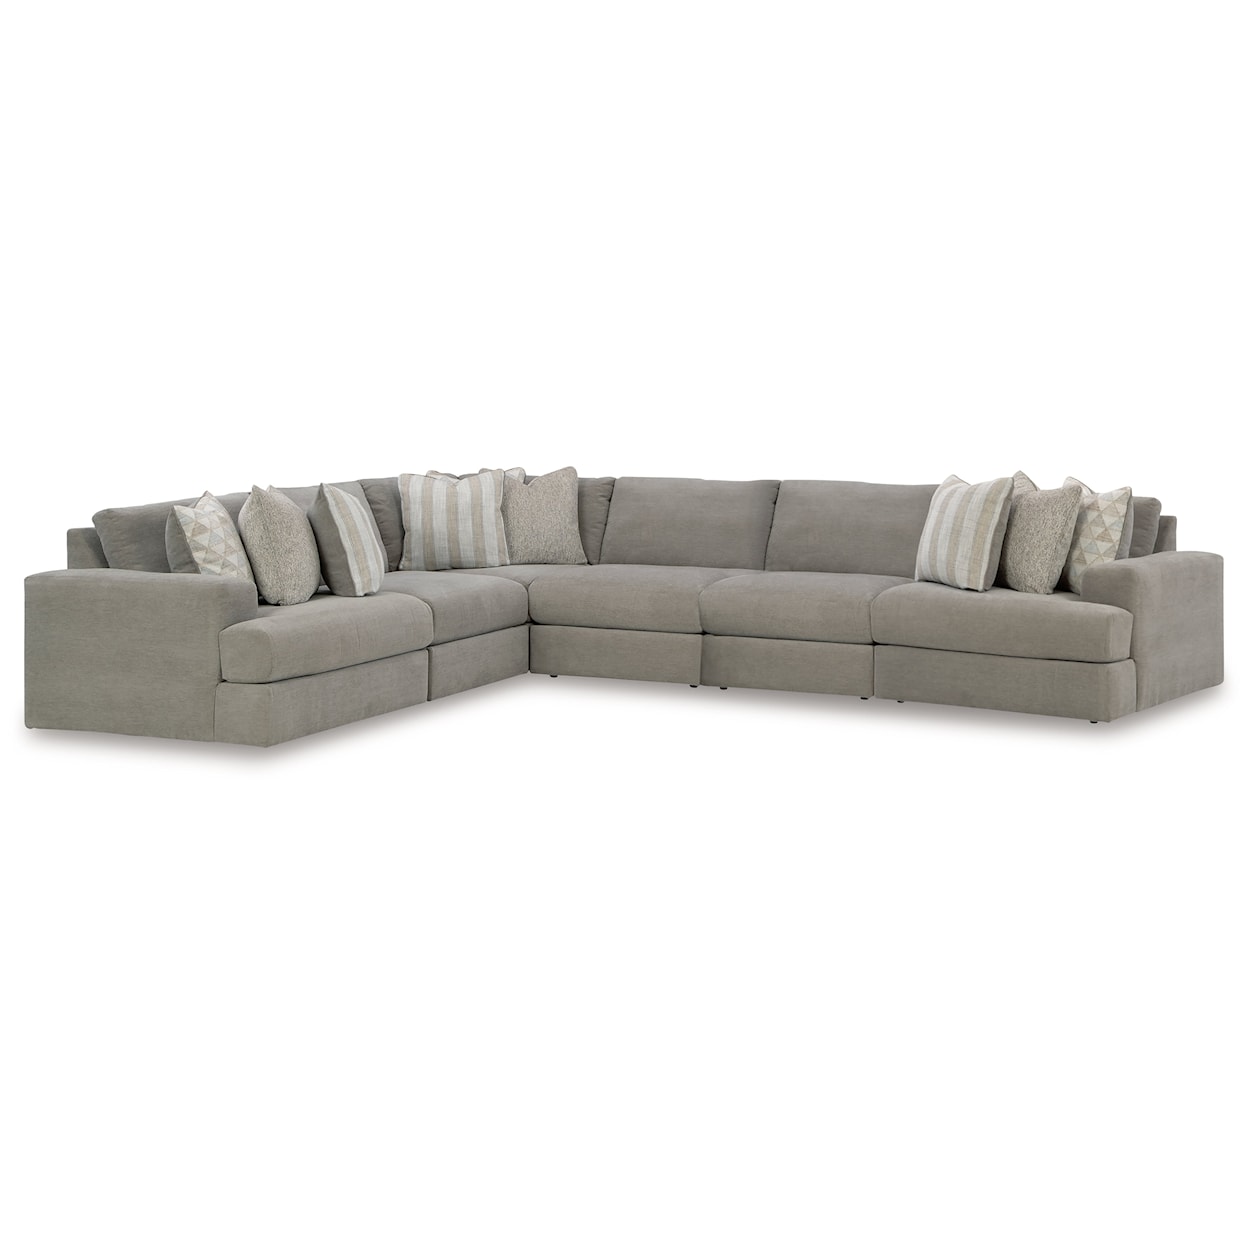 Benchcraft Avaliyah 6-Piece Sectional